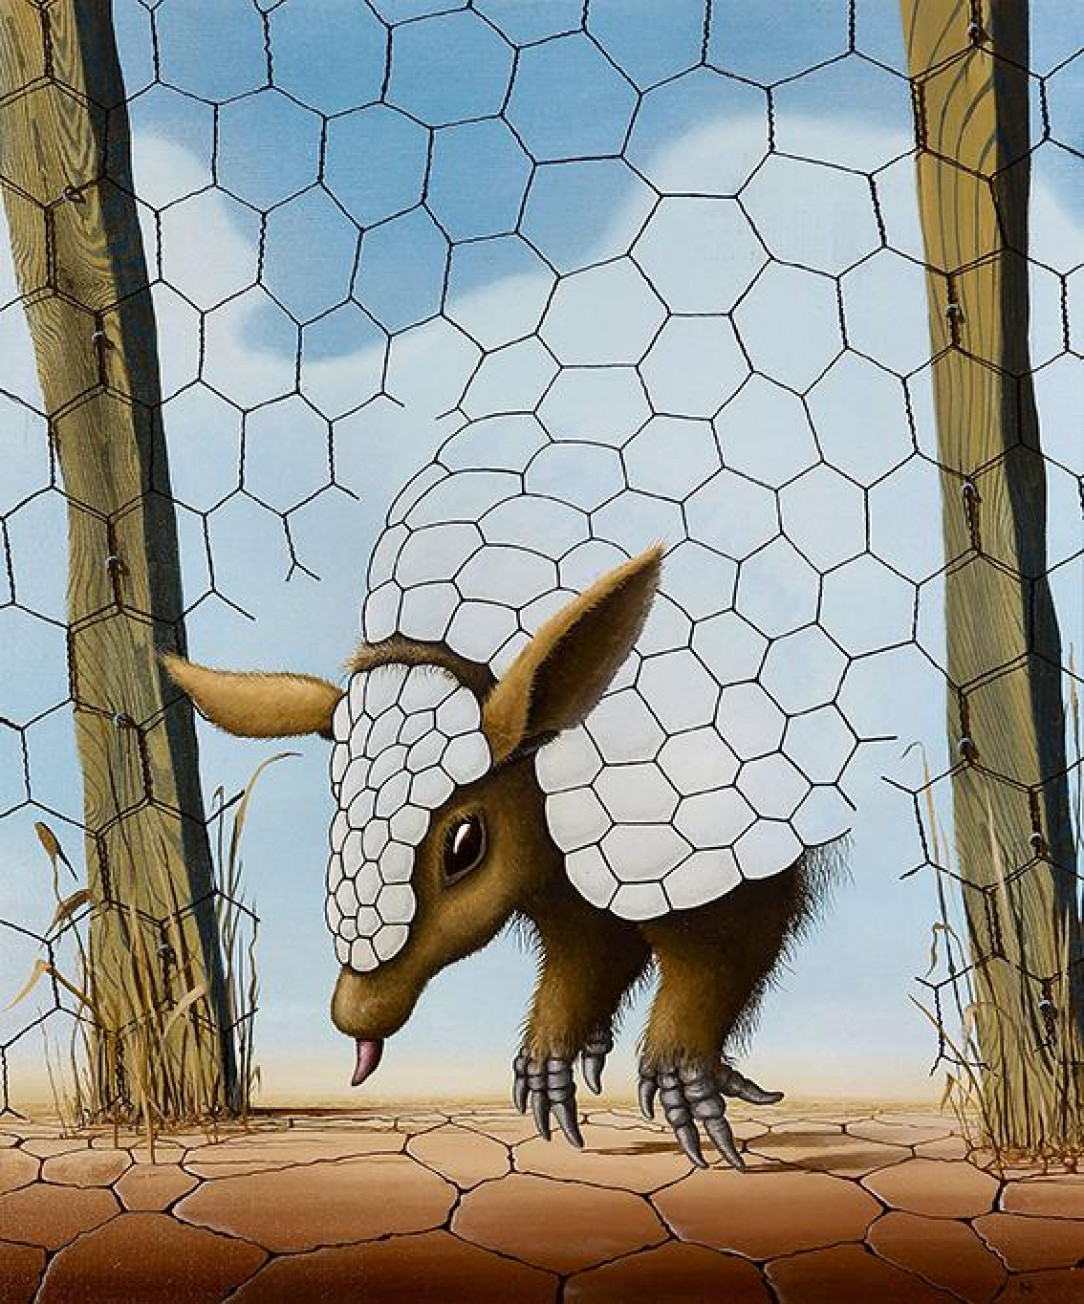 This painting, by my father Norman Parker, of an armadillo escaping from a compound